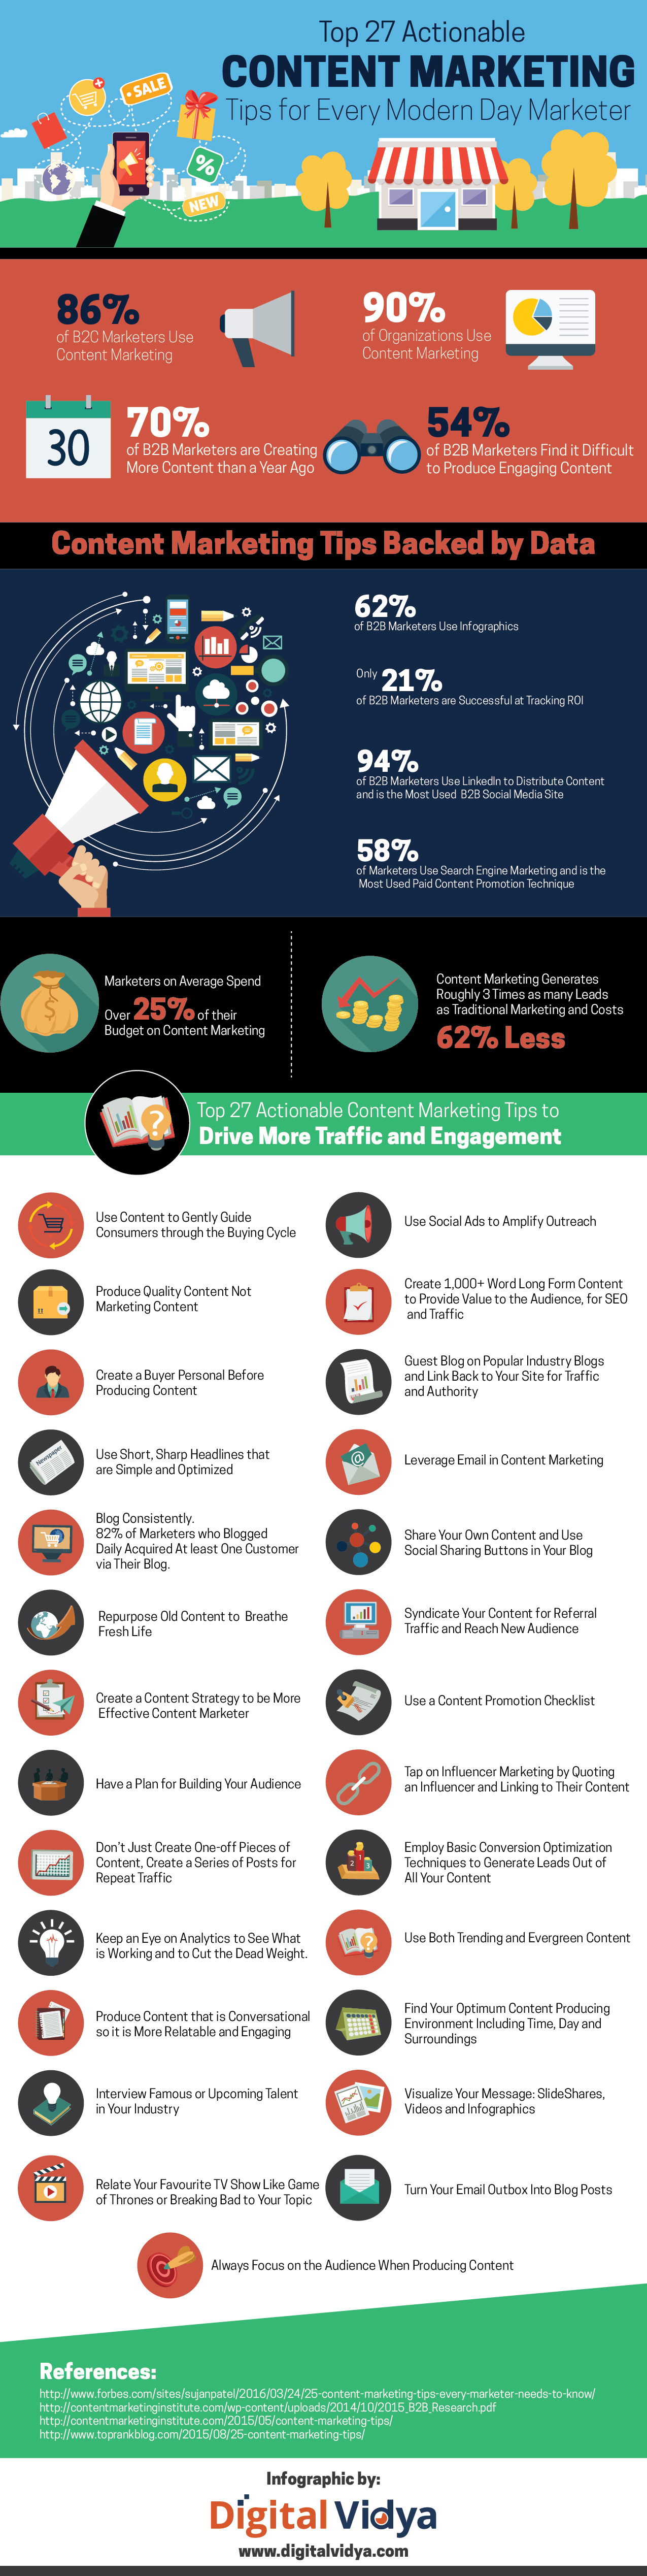 Top-27-Actionable-Content-Marketing-Tips-for-Every-Modern-Day-Marketer-Infographic-image